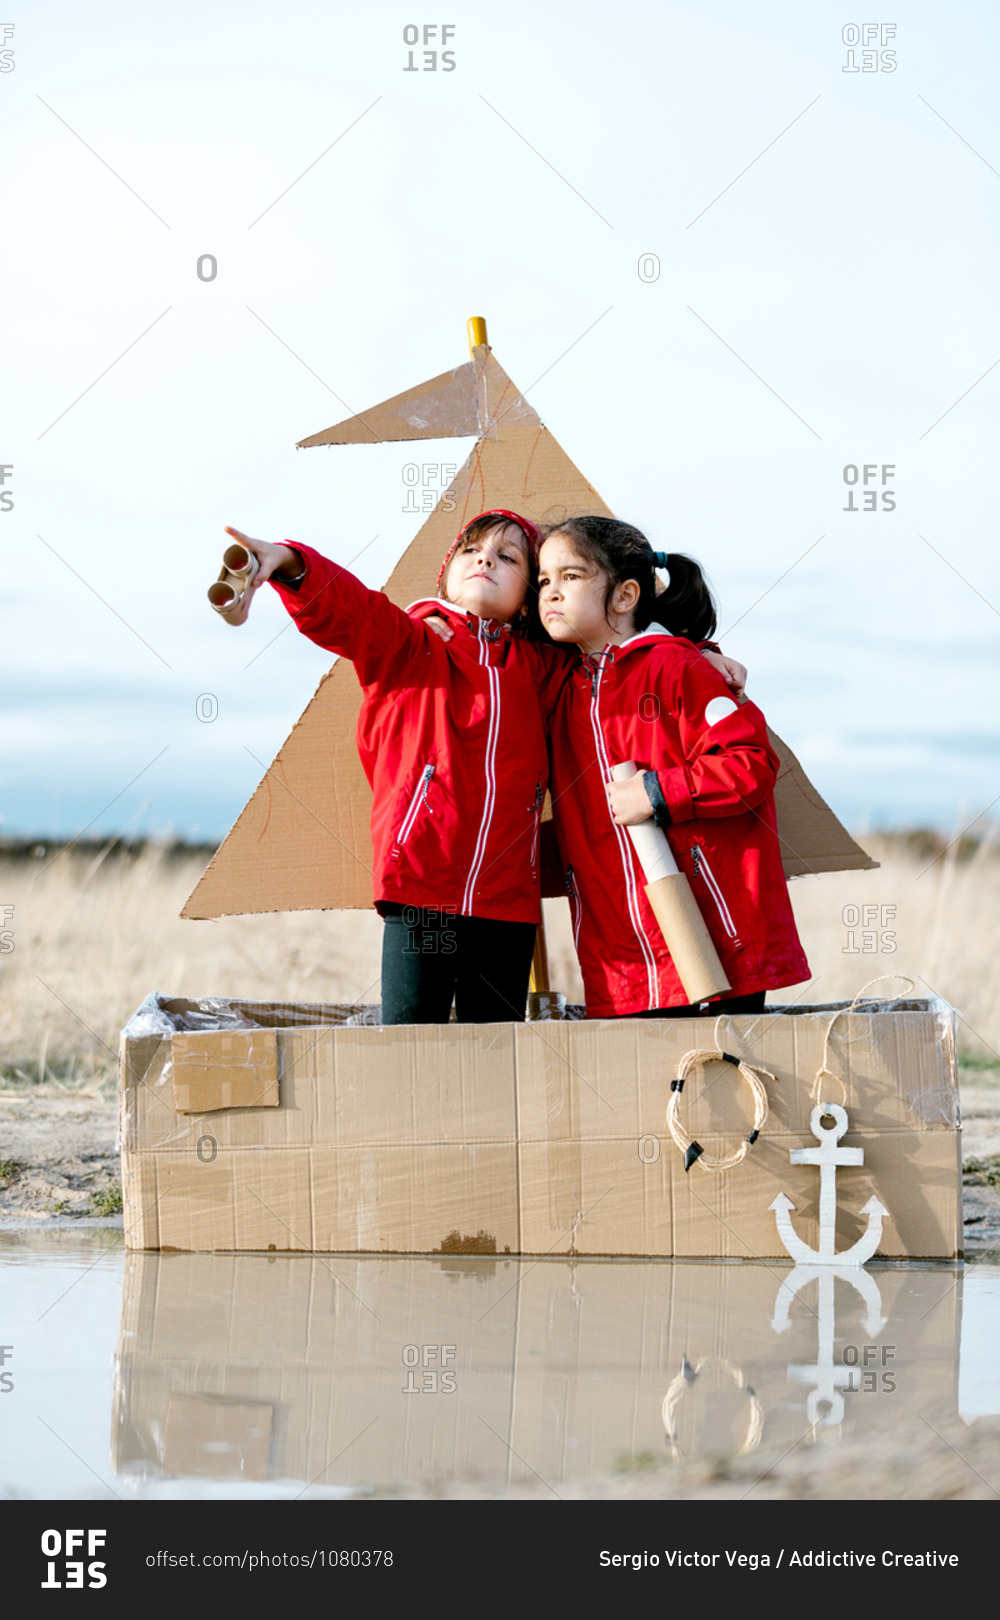 Side view of cheerful kids with handmade spyglass standing in handmade cardboard boat and playing